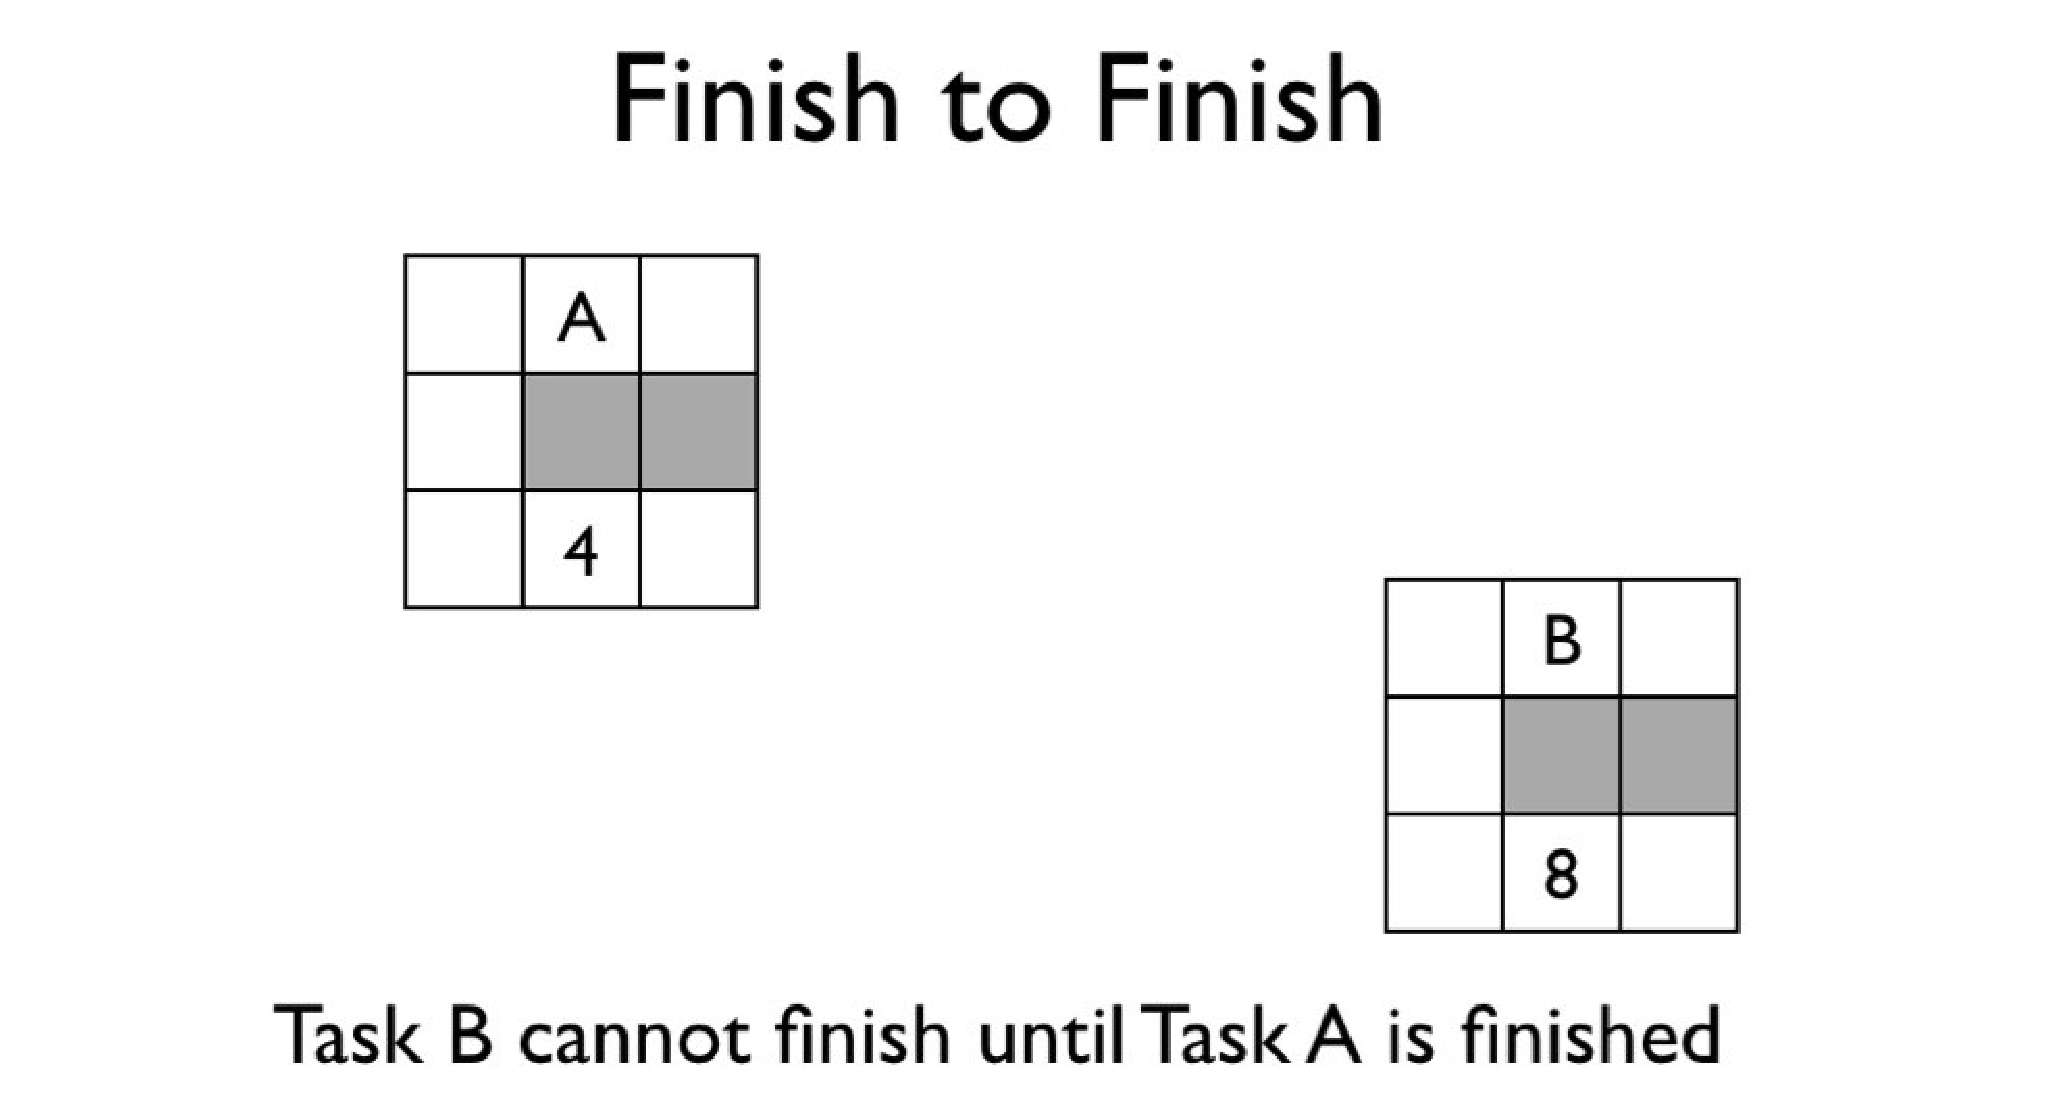 Diagram of a Finish to Finish task relationship.